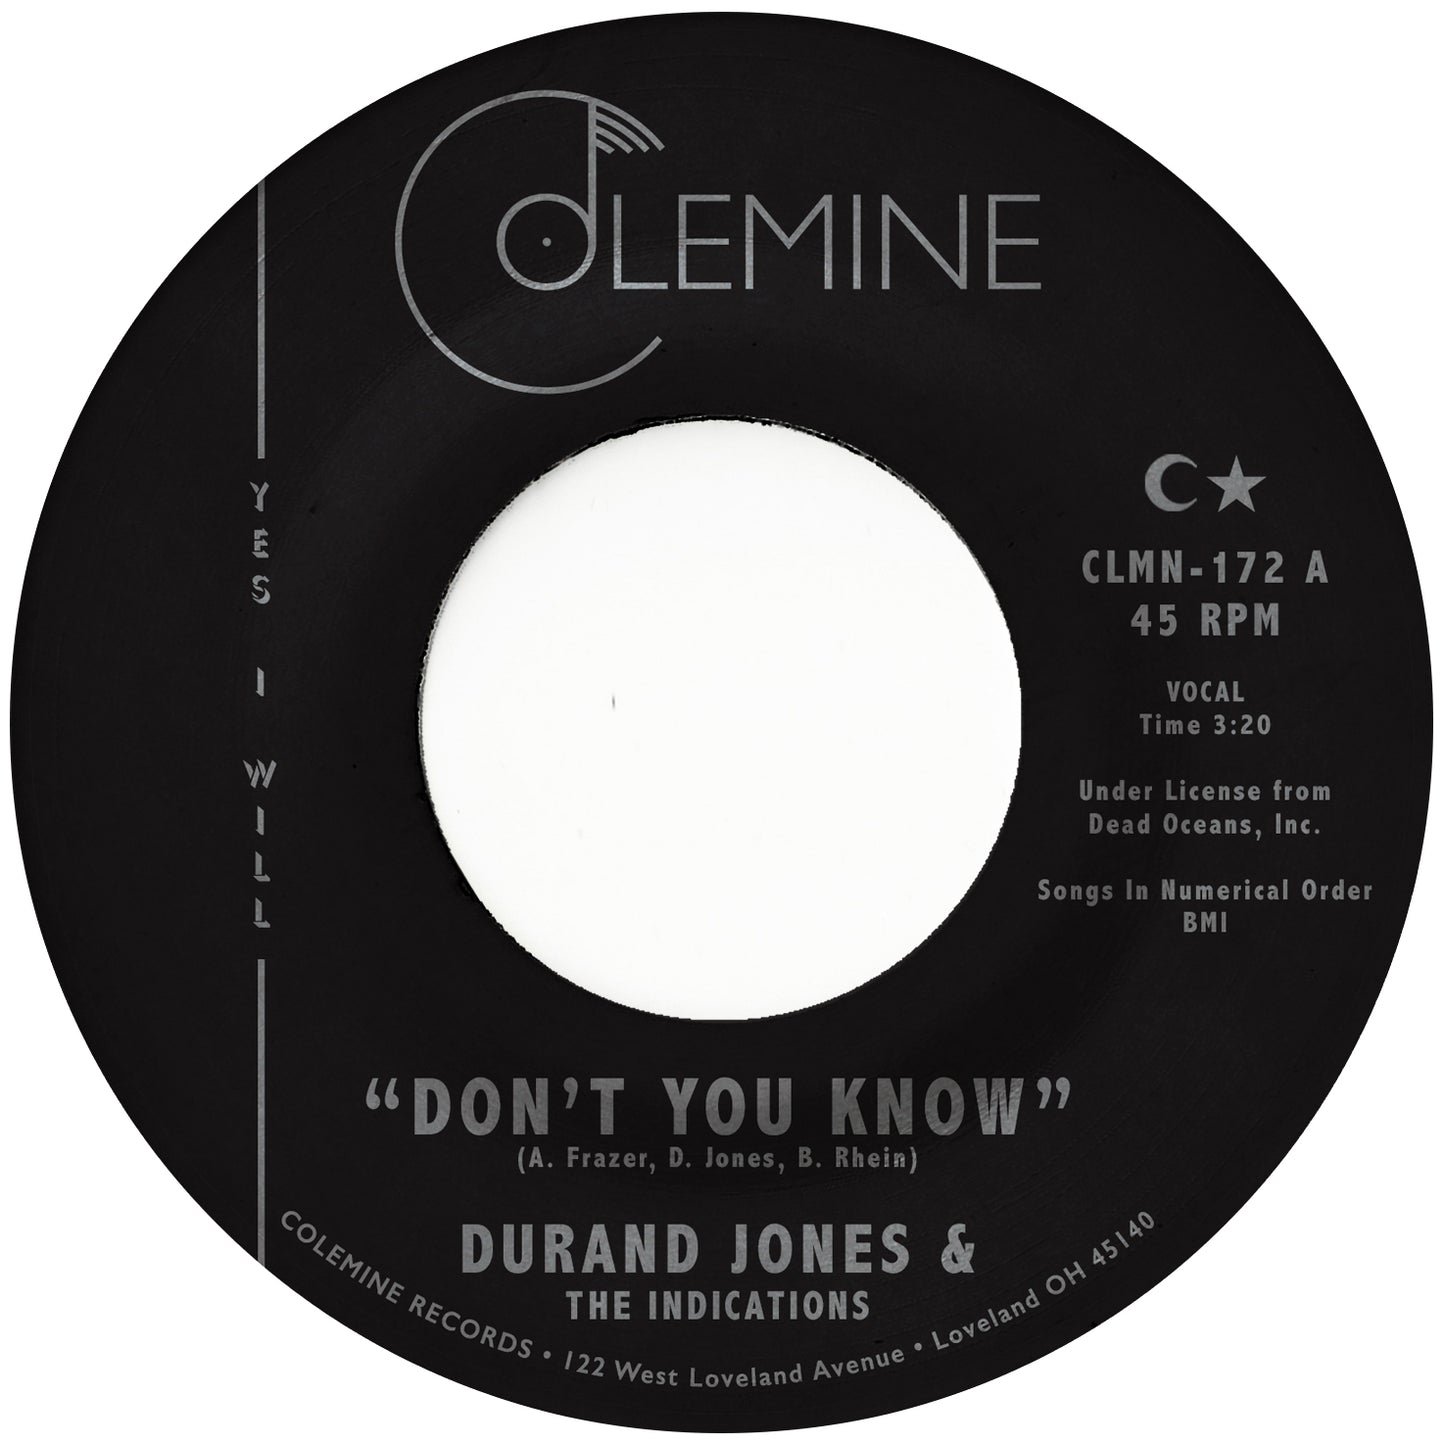 Durand Jones & The Indications – Don't You Know b/w True Love